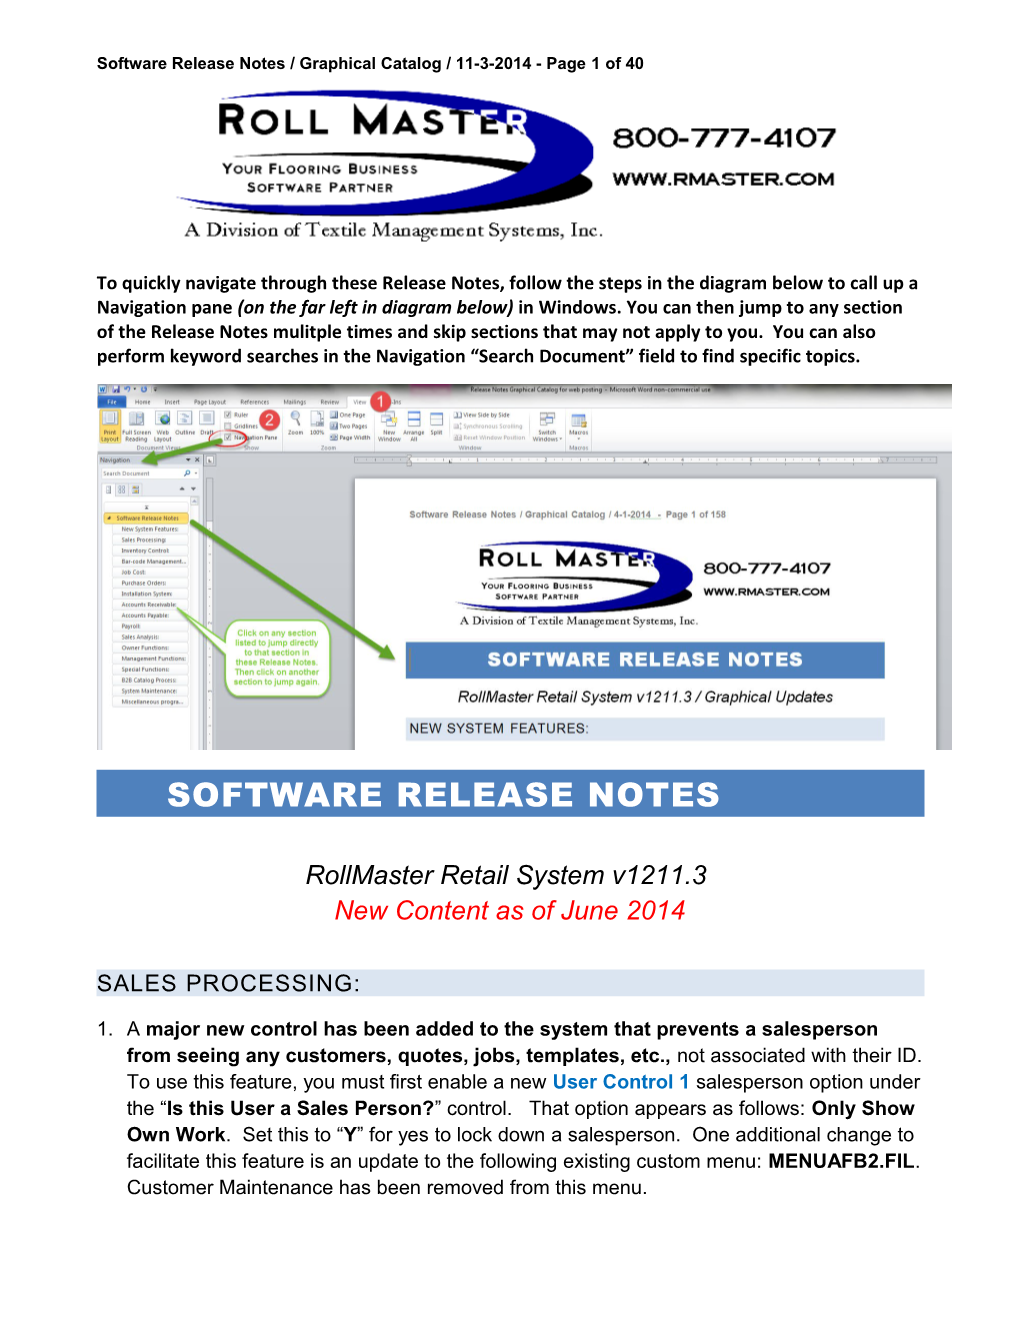 Software Release Notes / Graphical Catalog / 11-3-2014 - Page 1 of 40